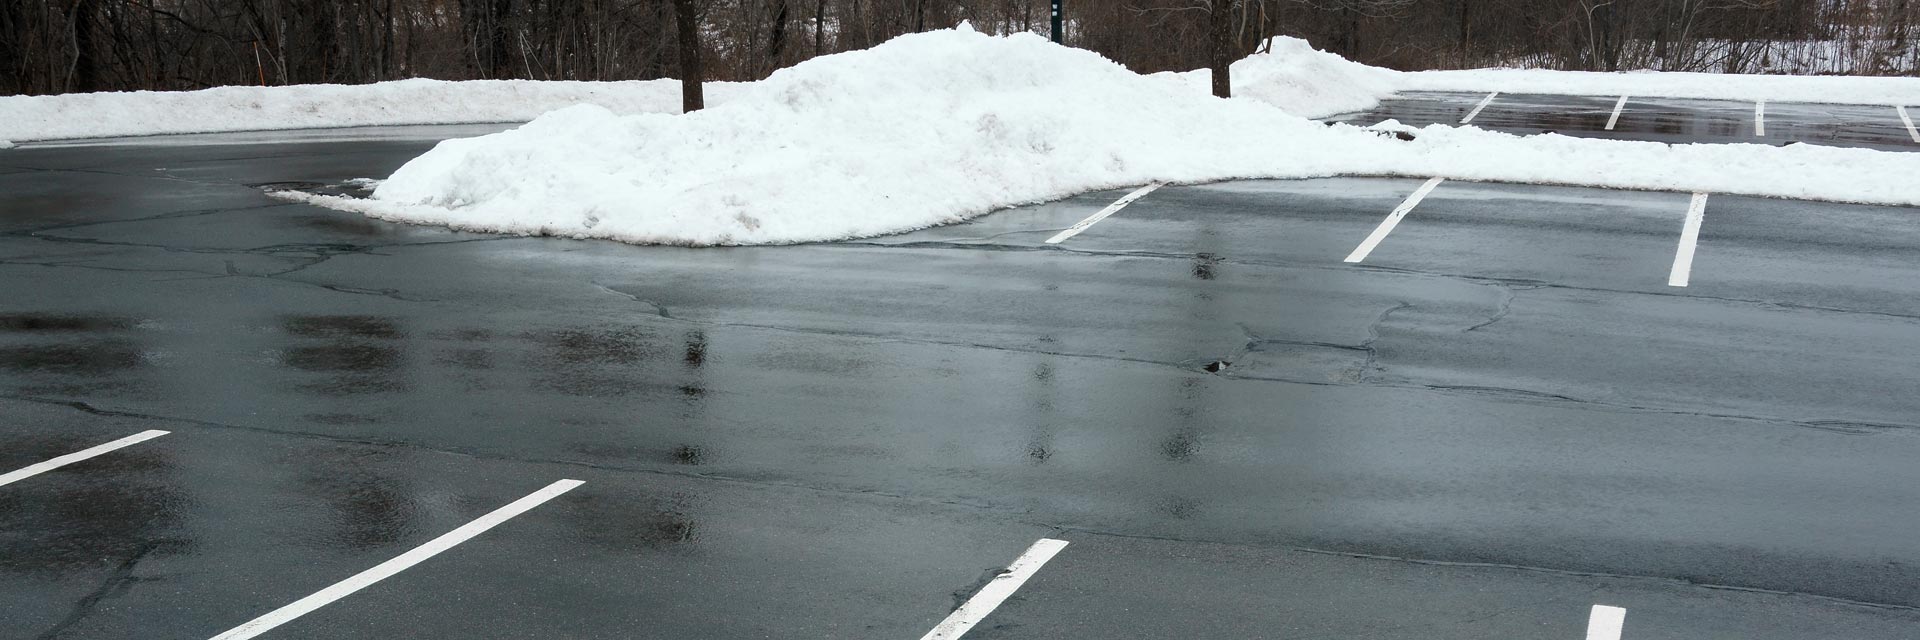 Empty Parking Lot With Snow Removed